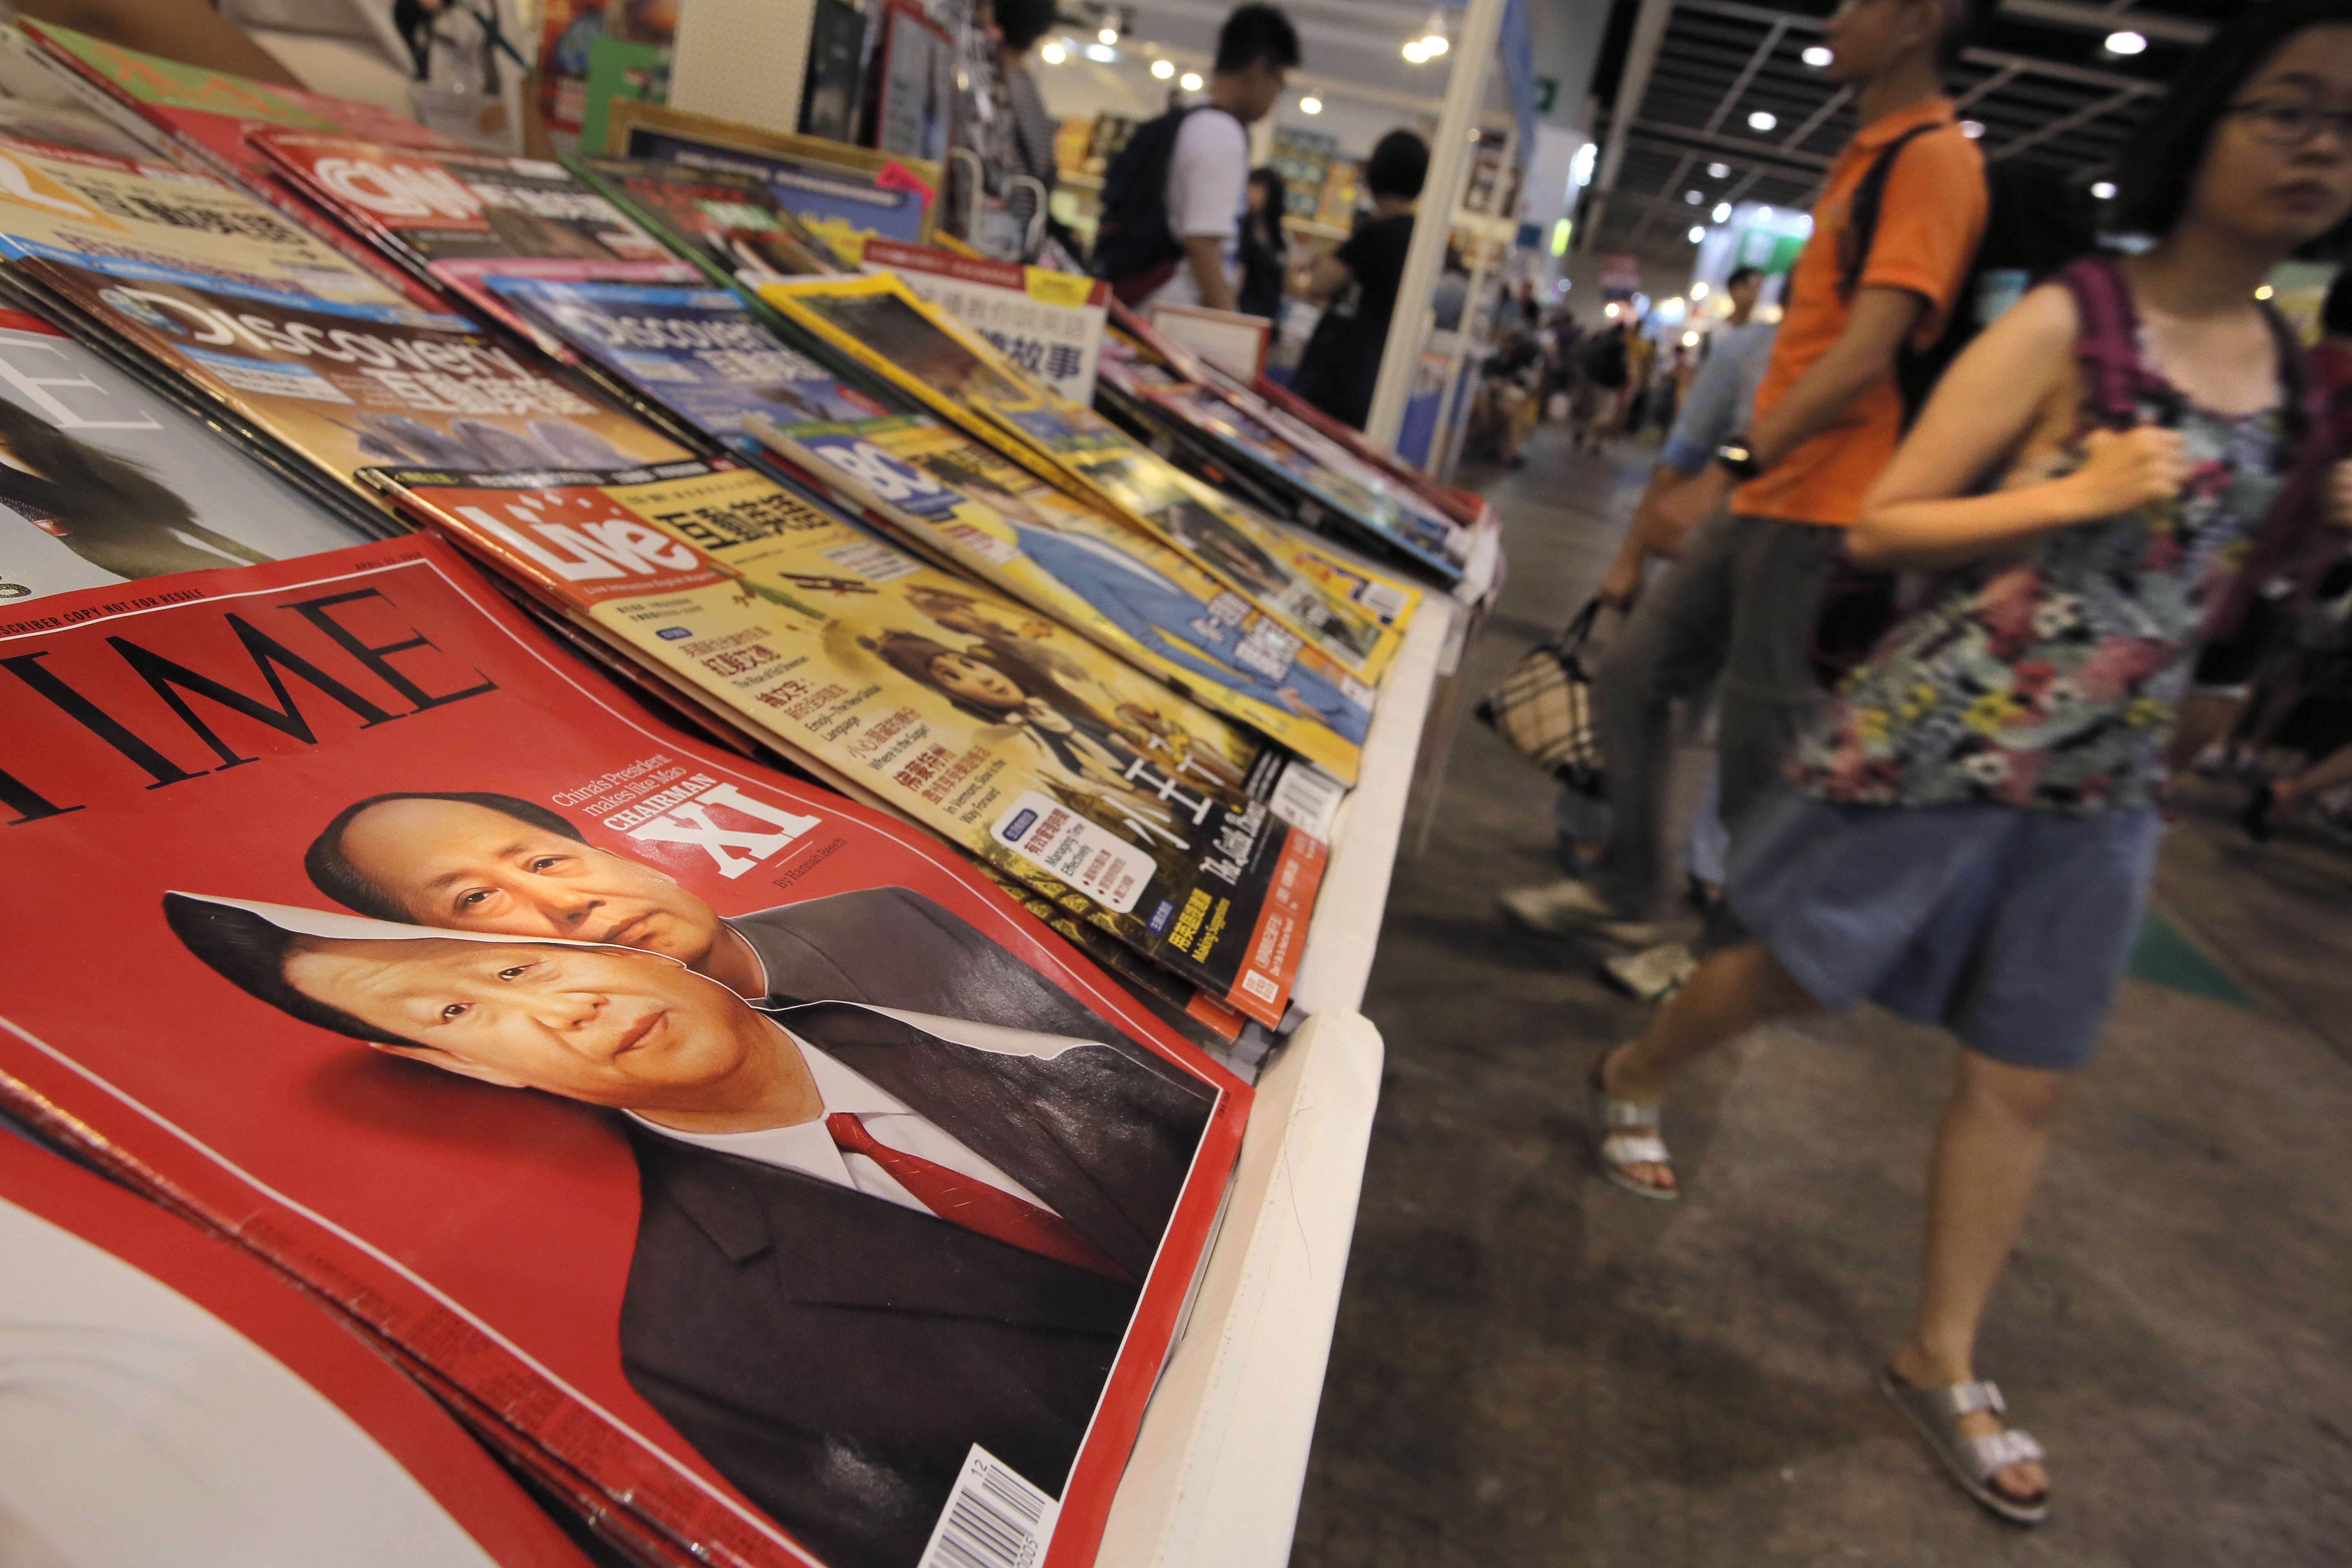 An April 2016 issue of Time magazine that features portraits of Xi Jinping and Mao Zedong on its cover is displayed at the Hong Kong Book Fair last month. Photo: AP